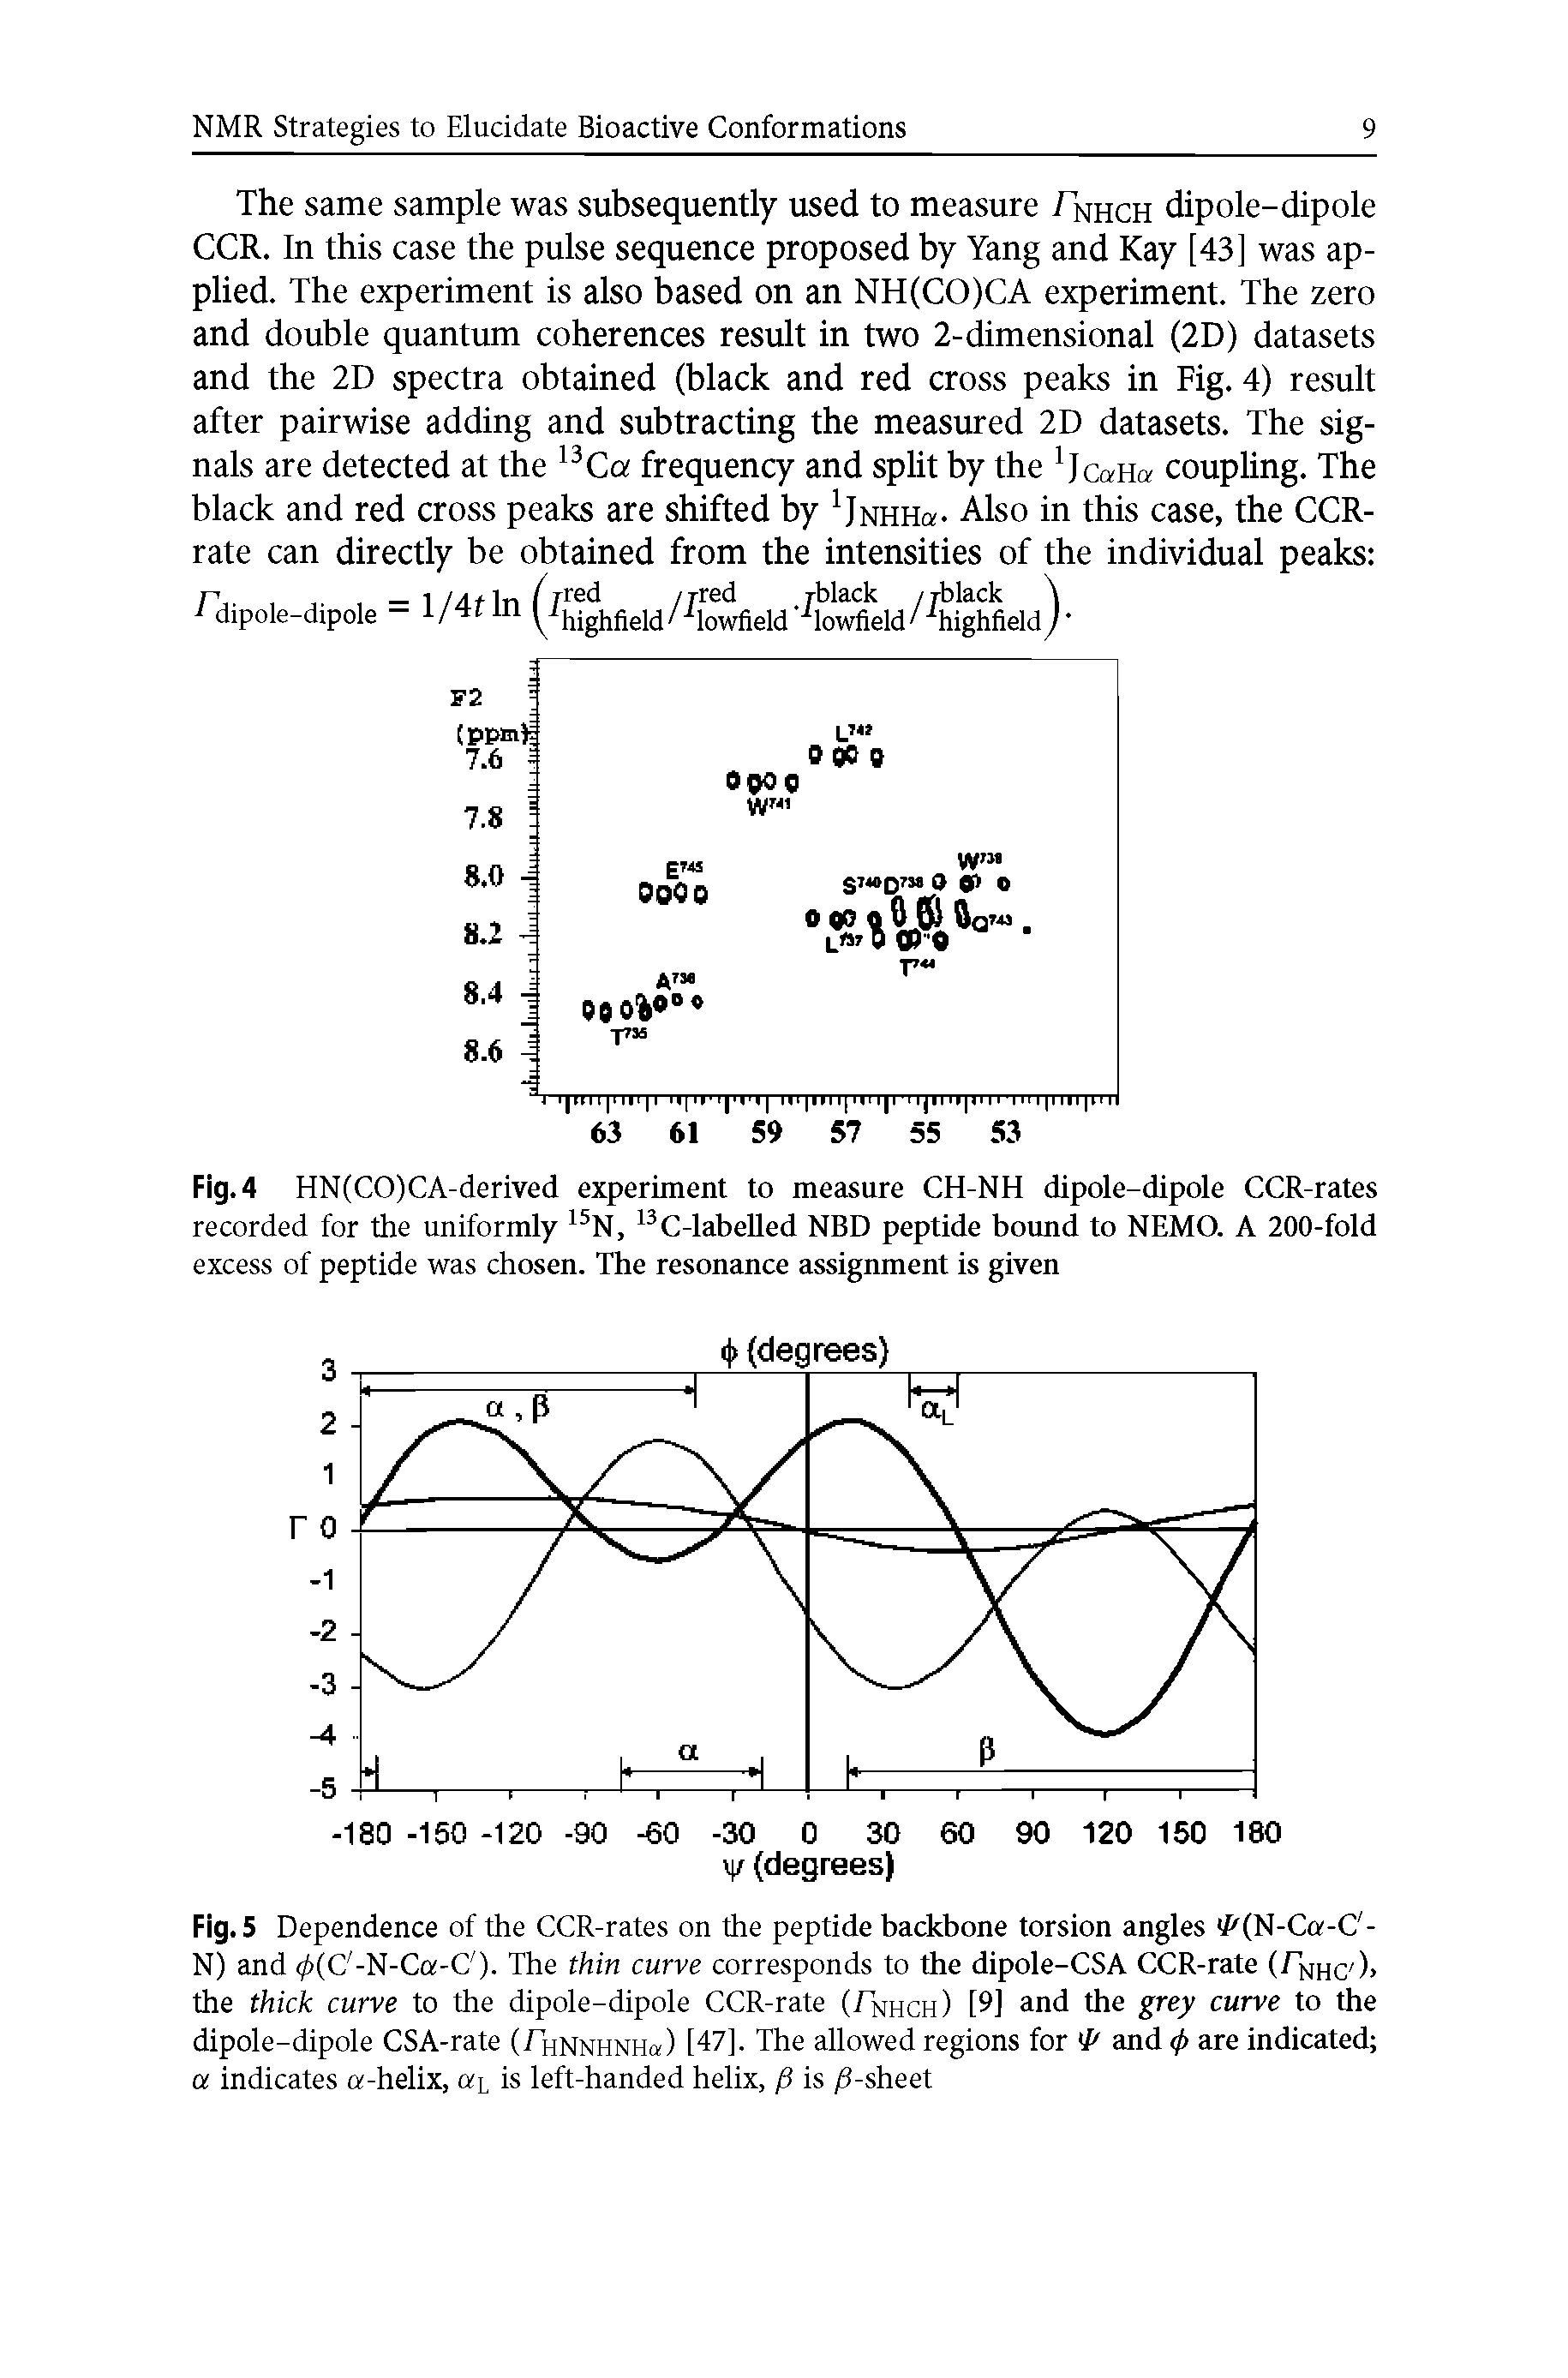 Fig. 5 Dependence of the CCR-rates on the peptide backbone torsion angles //(N-Ca-C -N) and 0(C -N-Ca-C ). The thin curve corresponds to the dipole-CSA CCR-rate (/nhc )> the thick curve to the dipole-dipole CCR-rate (Fnhch) [9] and the grey curve to the dipole-dipole CSA-rate (Thnnhnhq ) [47]. The allowed regions for and (j> are indicated a indicates a-helix, ar is left-handed helix, f) is /3-sheet...